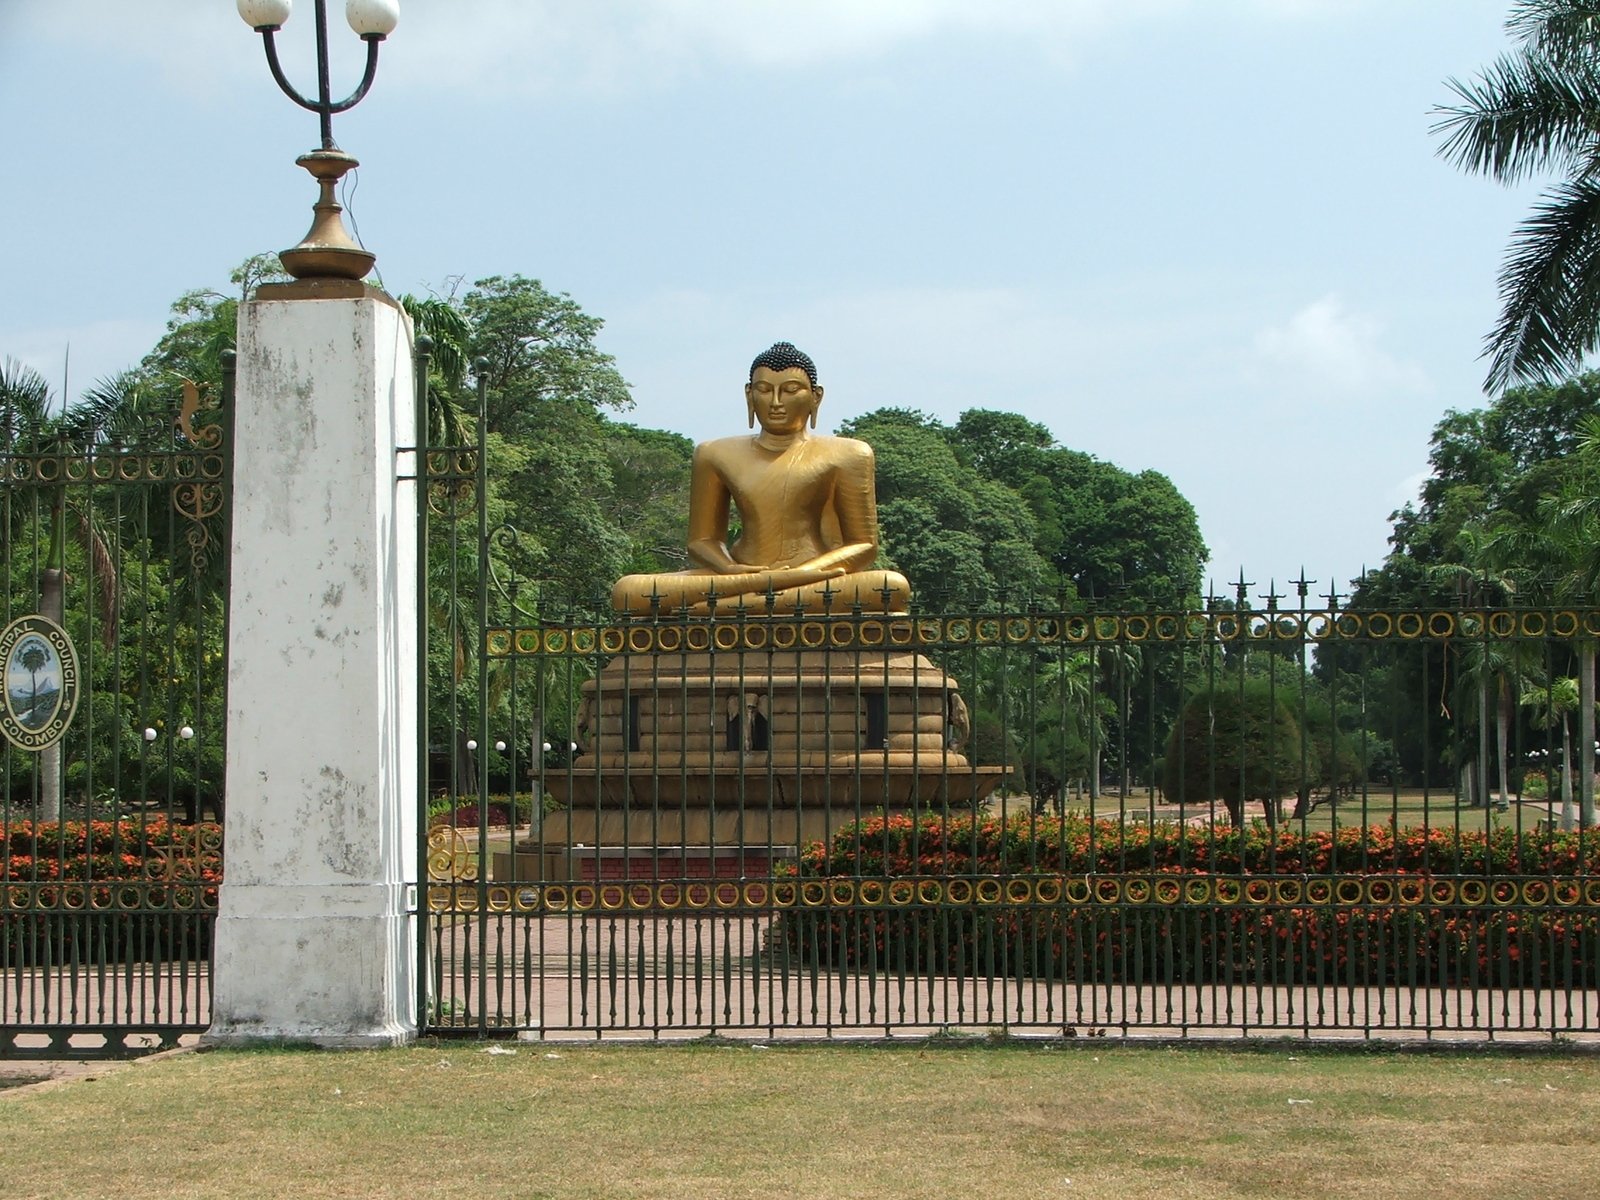 a statue of buddha is behind the fence in front of some bushes